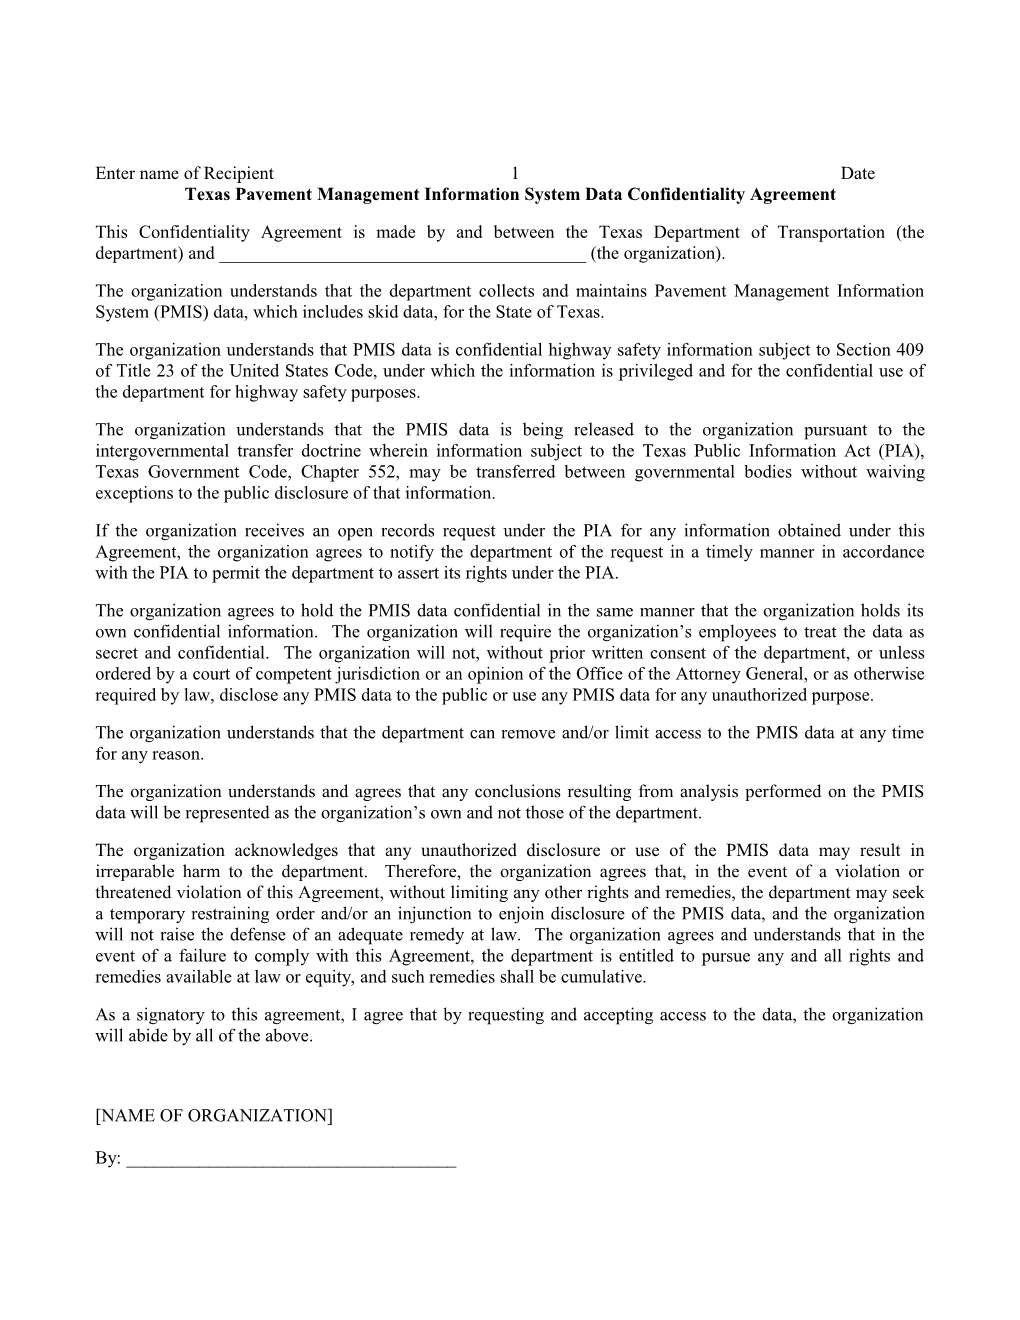 Texas Pavement Management Information System Data Confidentiality Agreement